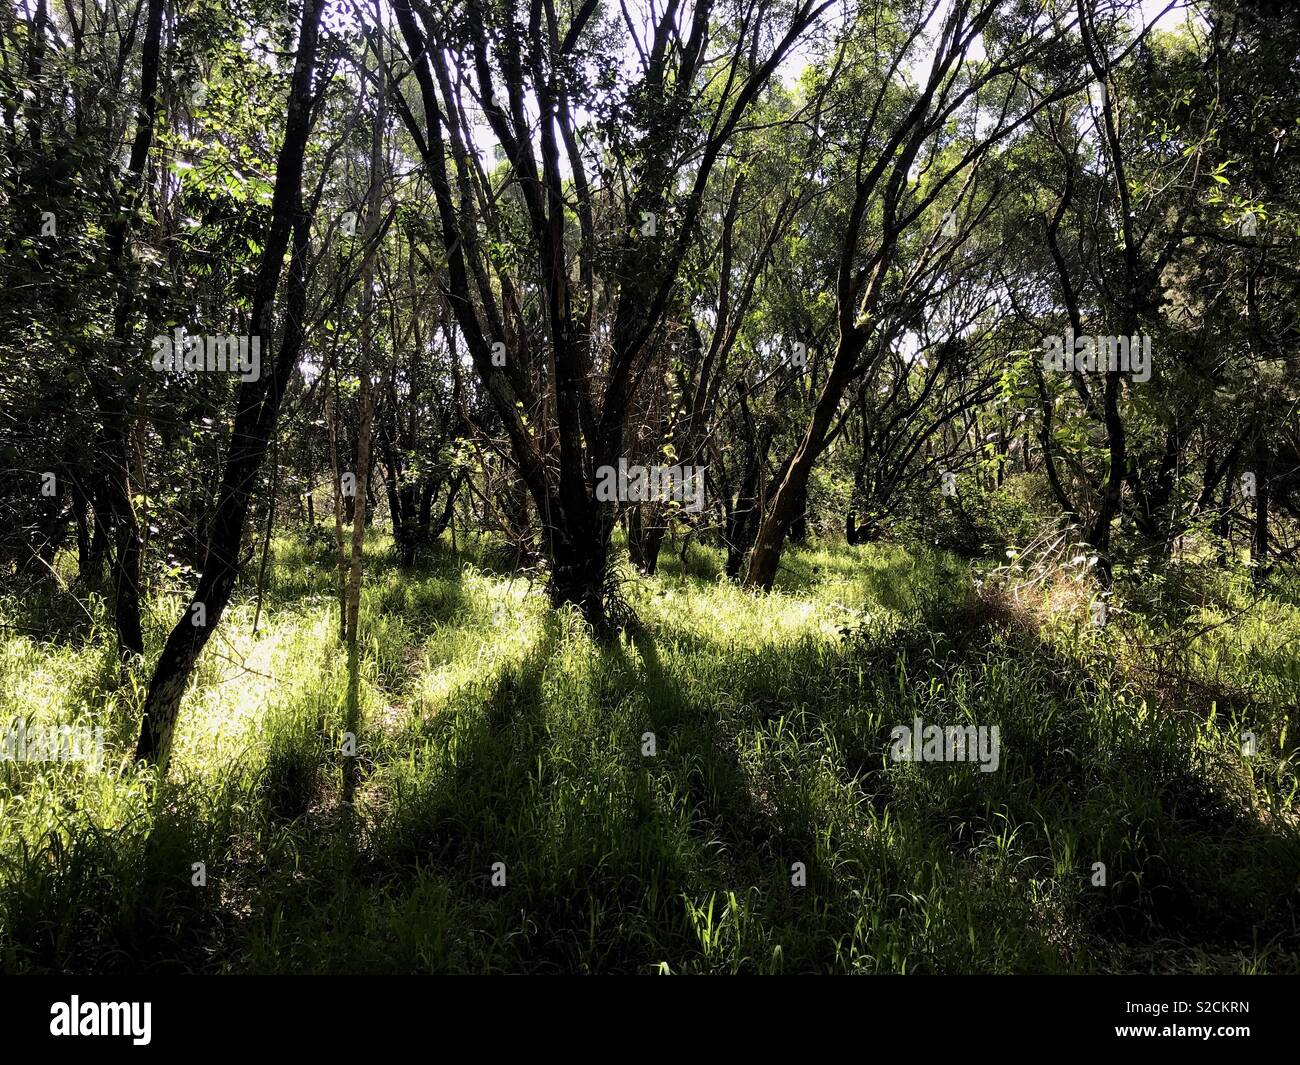 Coastal scrub/rainforest, long grass glowing in the spring sunlight; in the middle of land proposed for development, at Iluka, NSW, Australia. Stock Photo